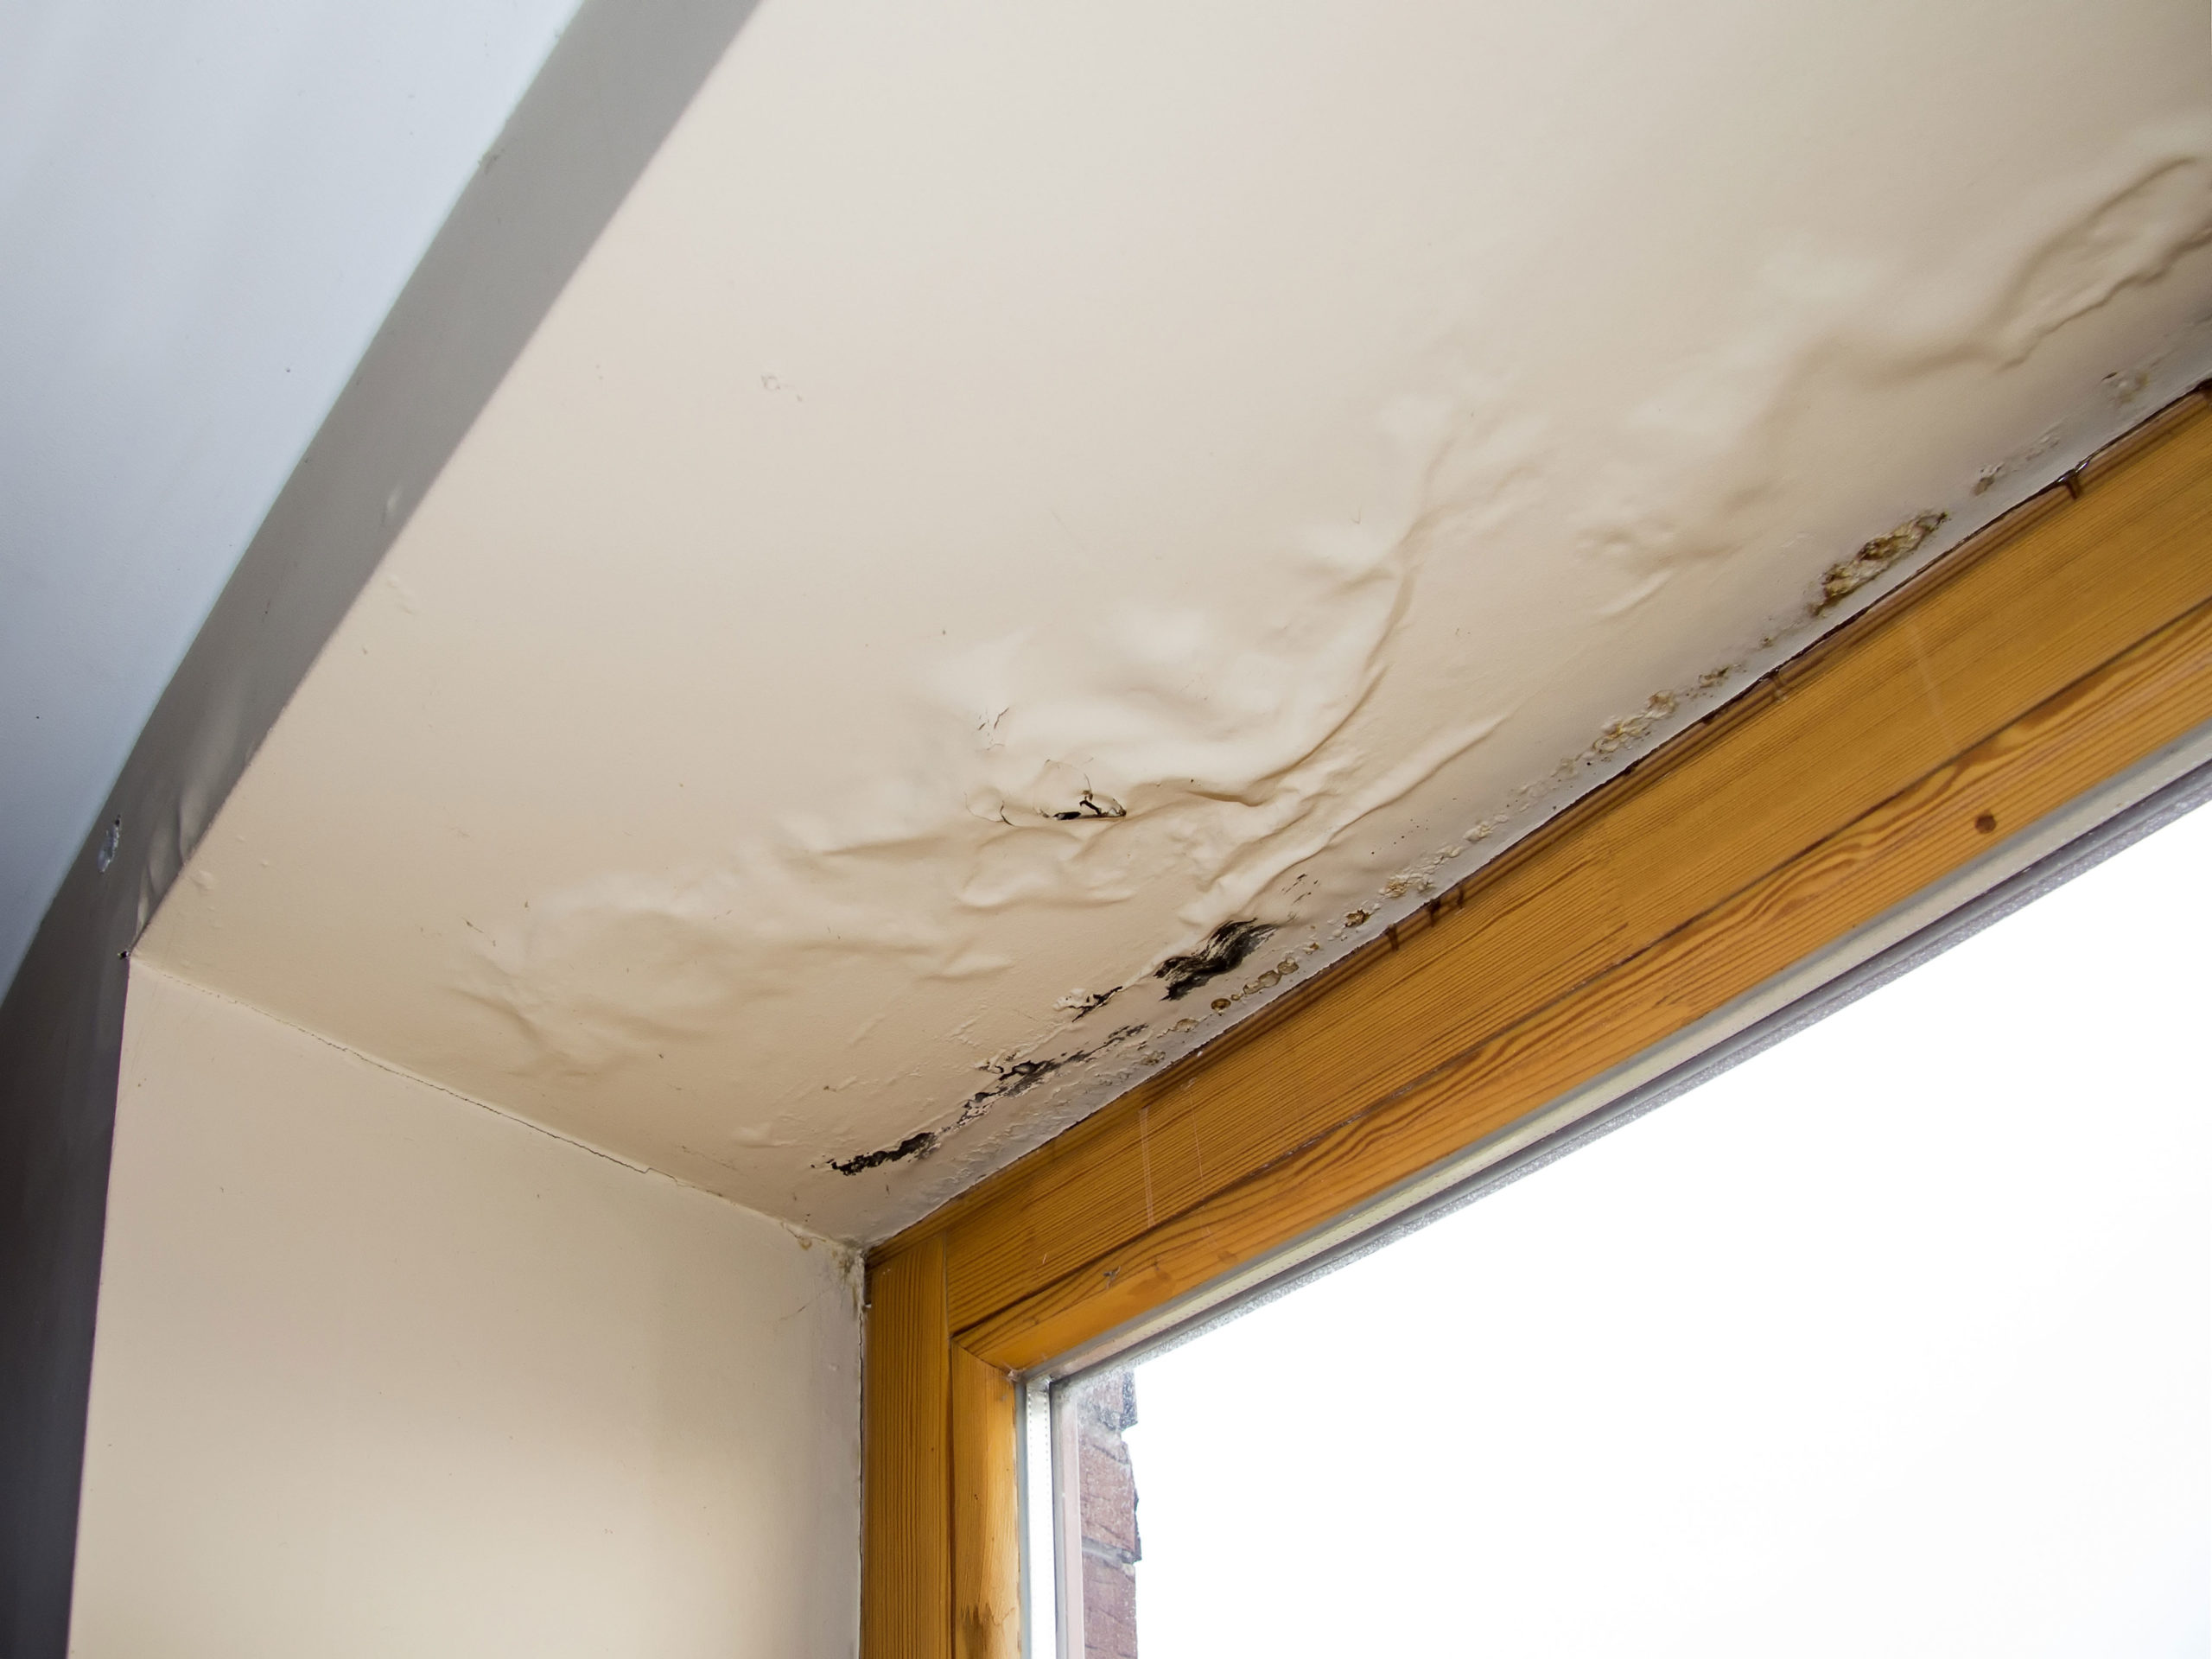 How Condensation Can Mimic Commercial Roof Leaks